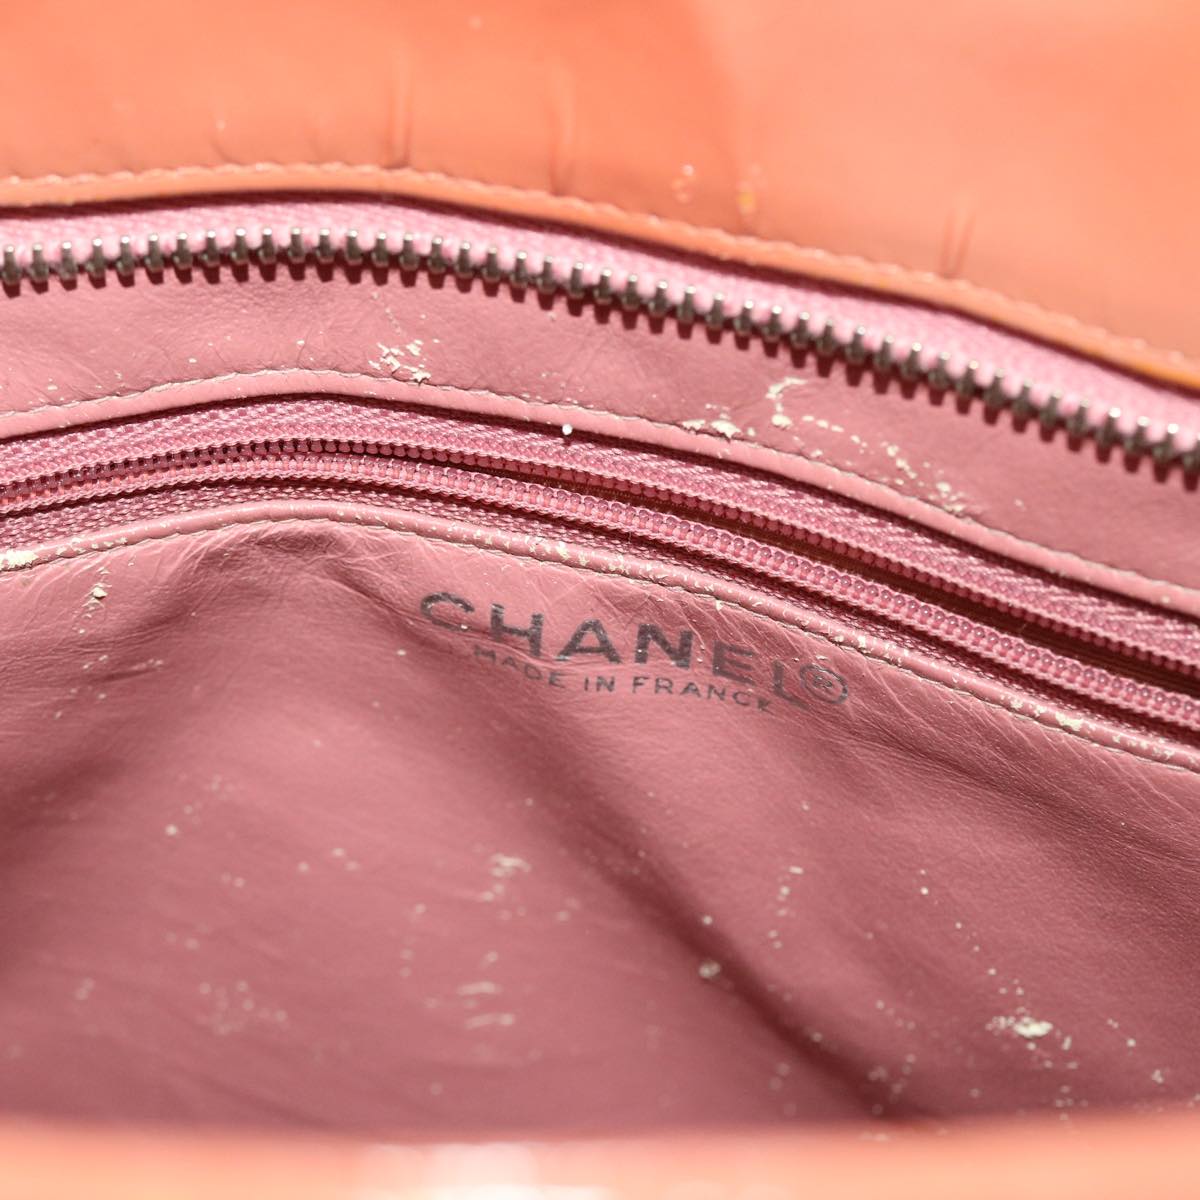 CHANEL Tote Bag Patent leather Reprint Pink CC Auth am4588